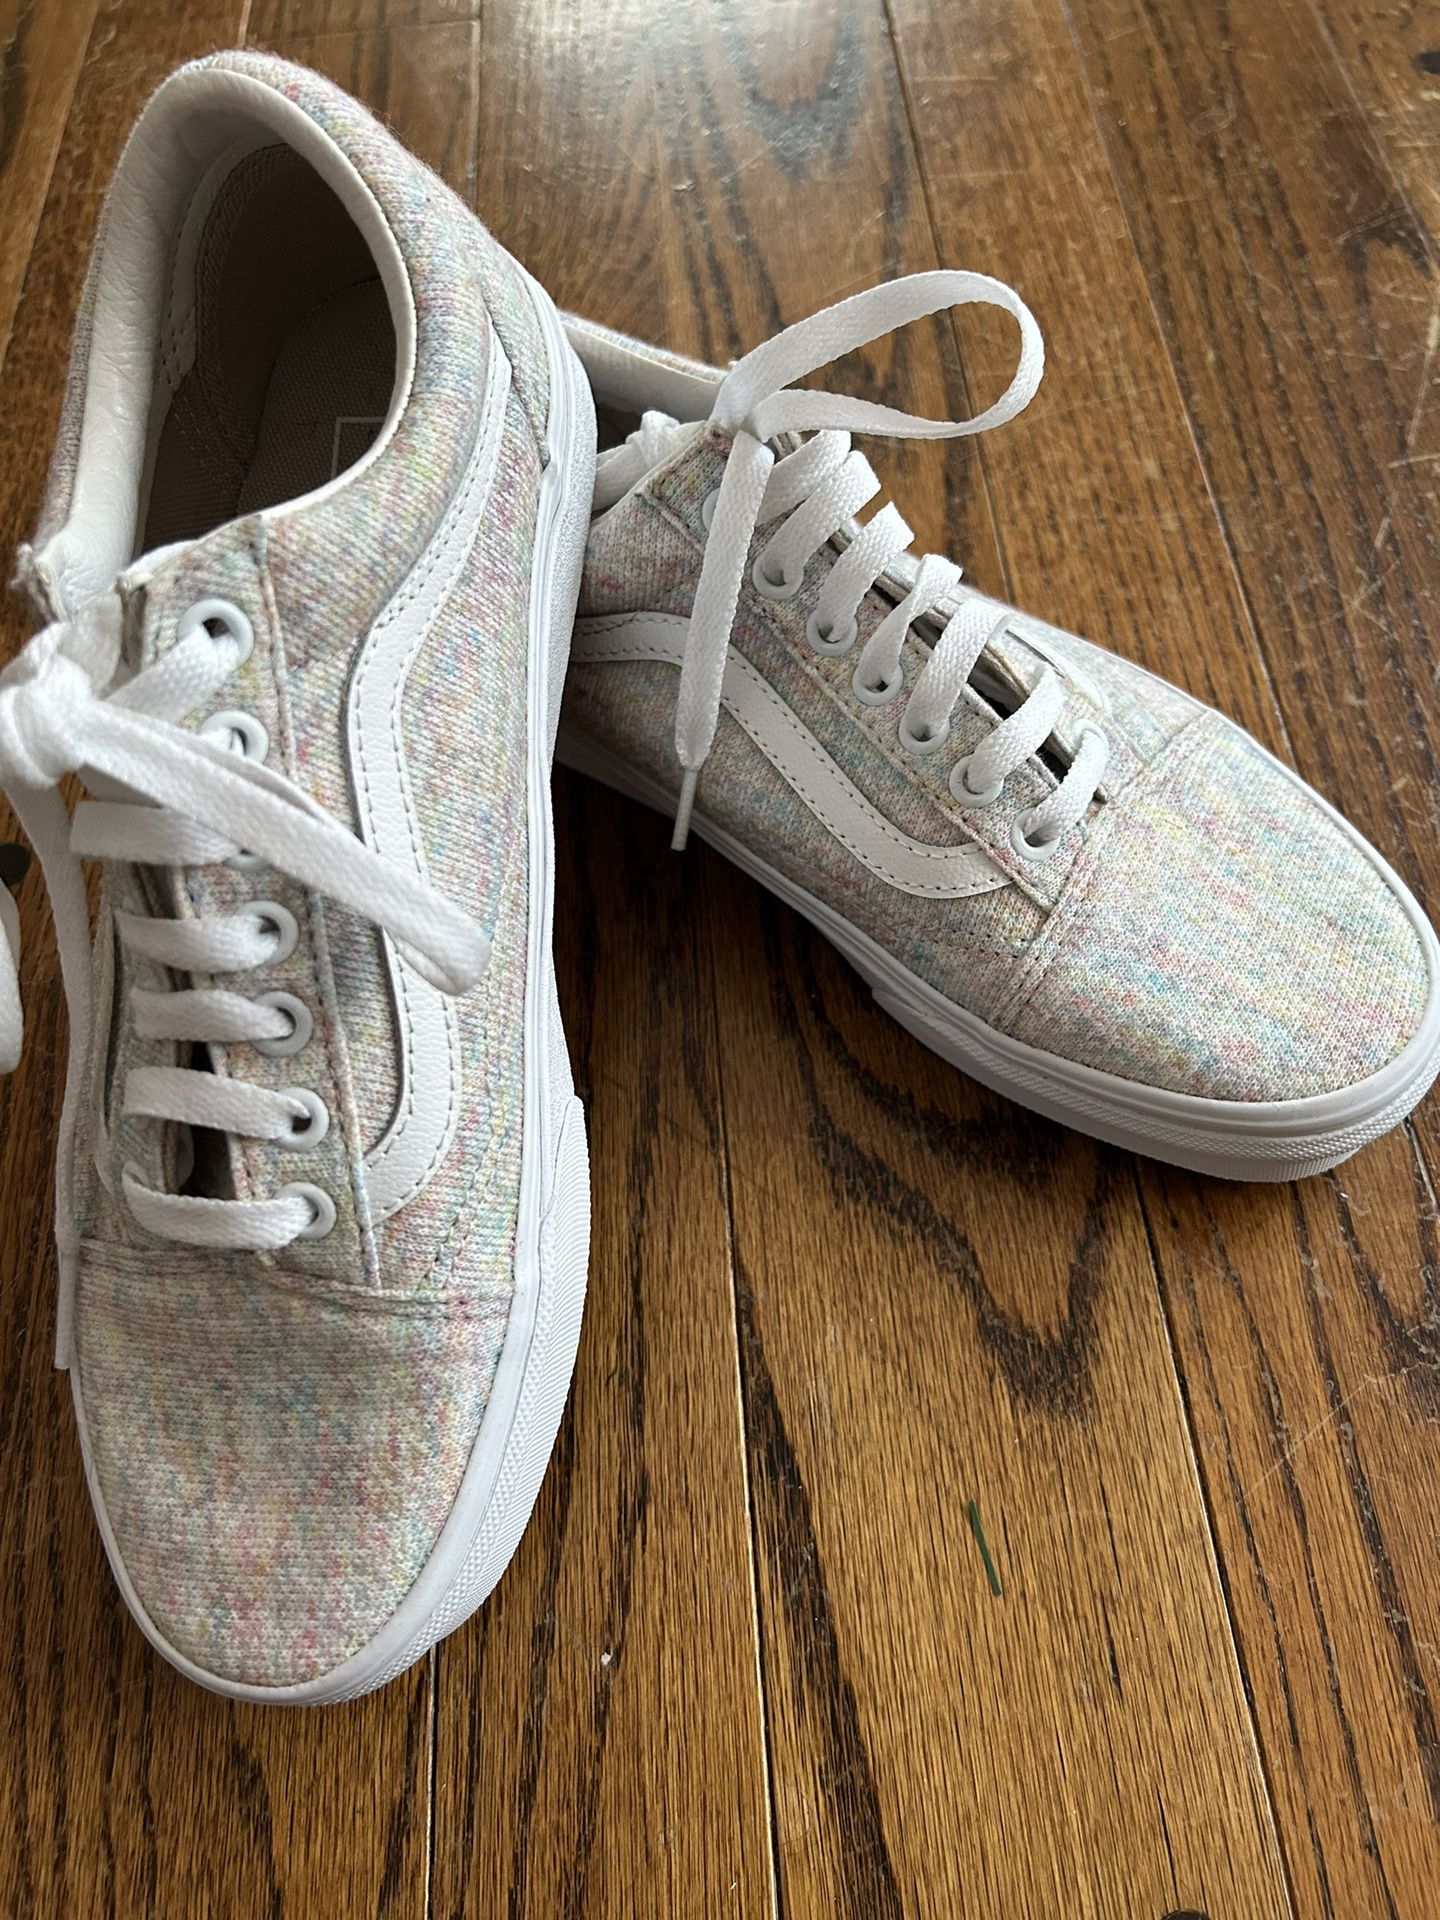 NEW Vans Size 6.5 Off The Wall Old Skool Multi Pastel Fleck Shoes